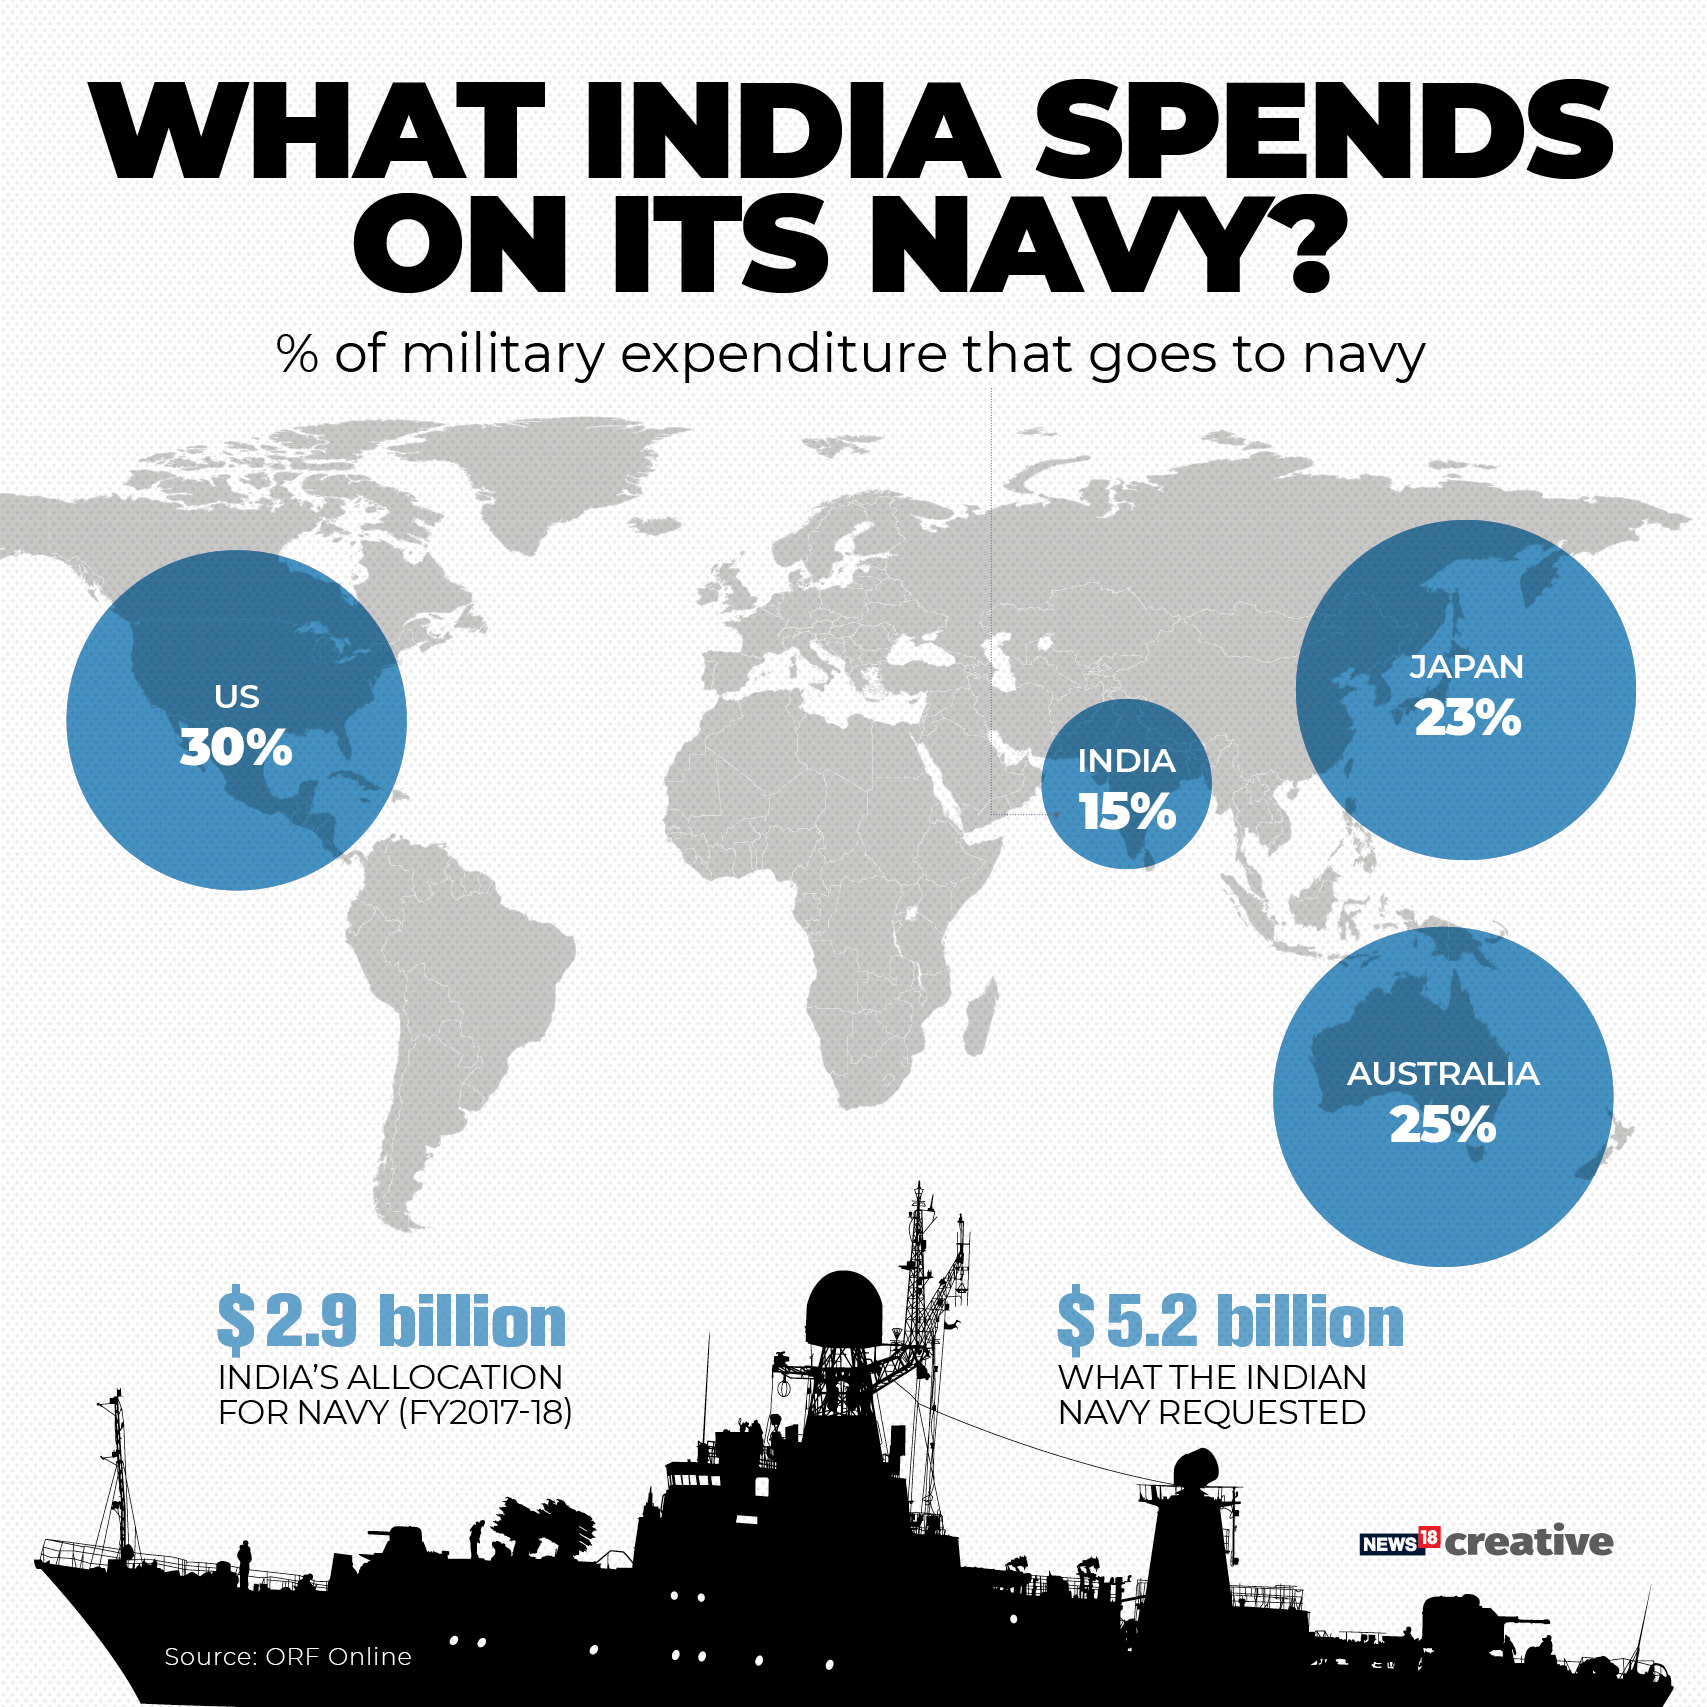 Navy Day Some key facts and details about the Indian Navy